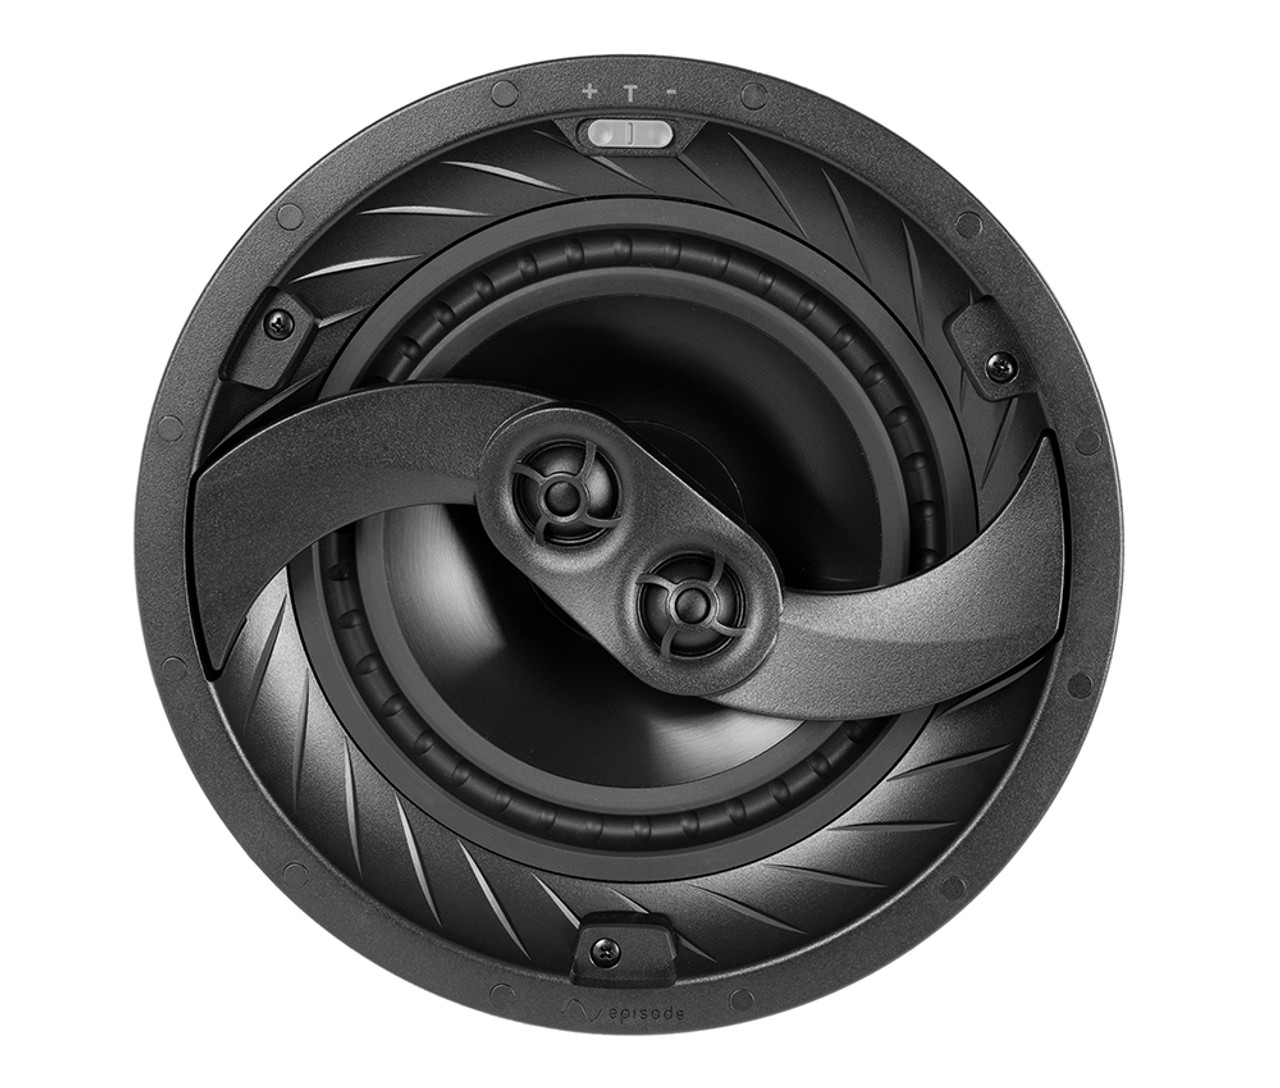 Episode Core 5 Series 8" DVC / Surround In-Ceiling Speaker (Each)